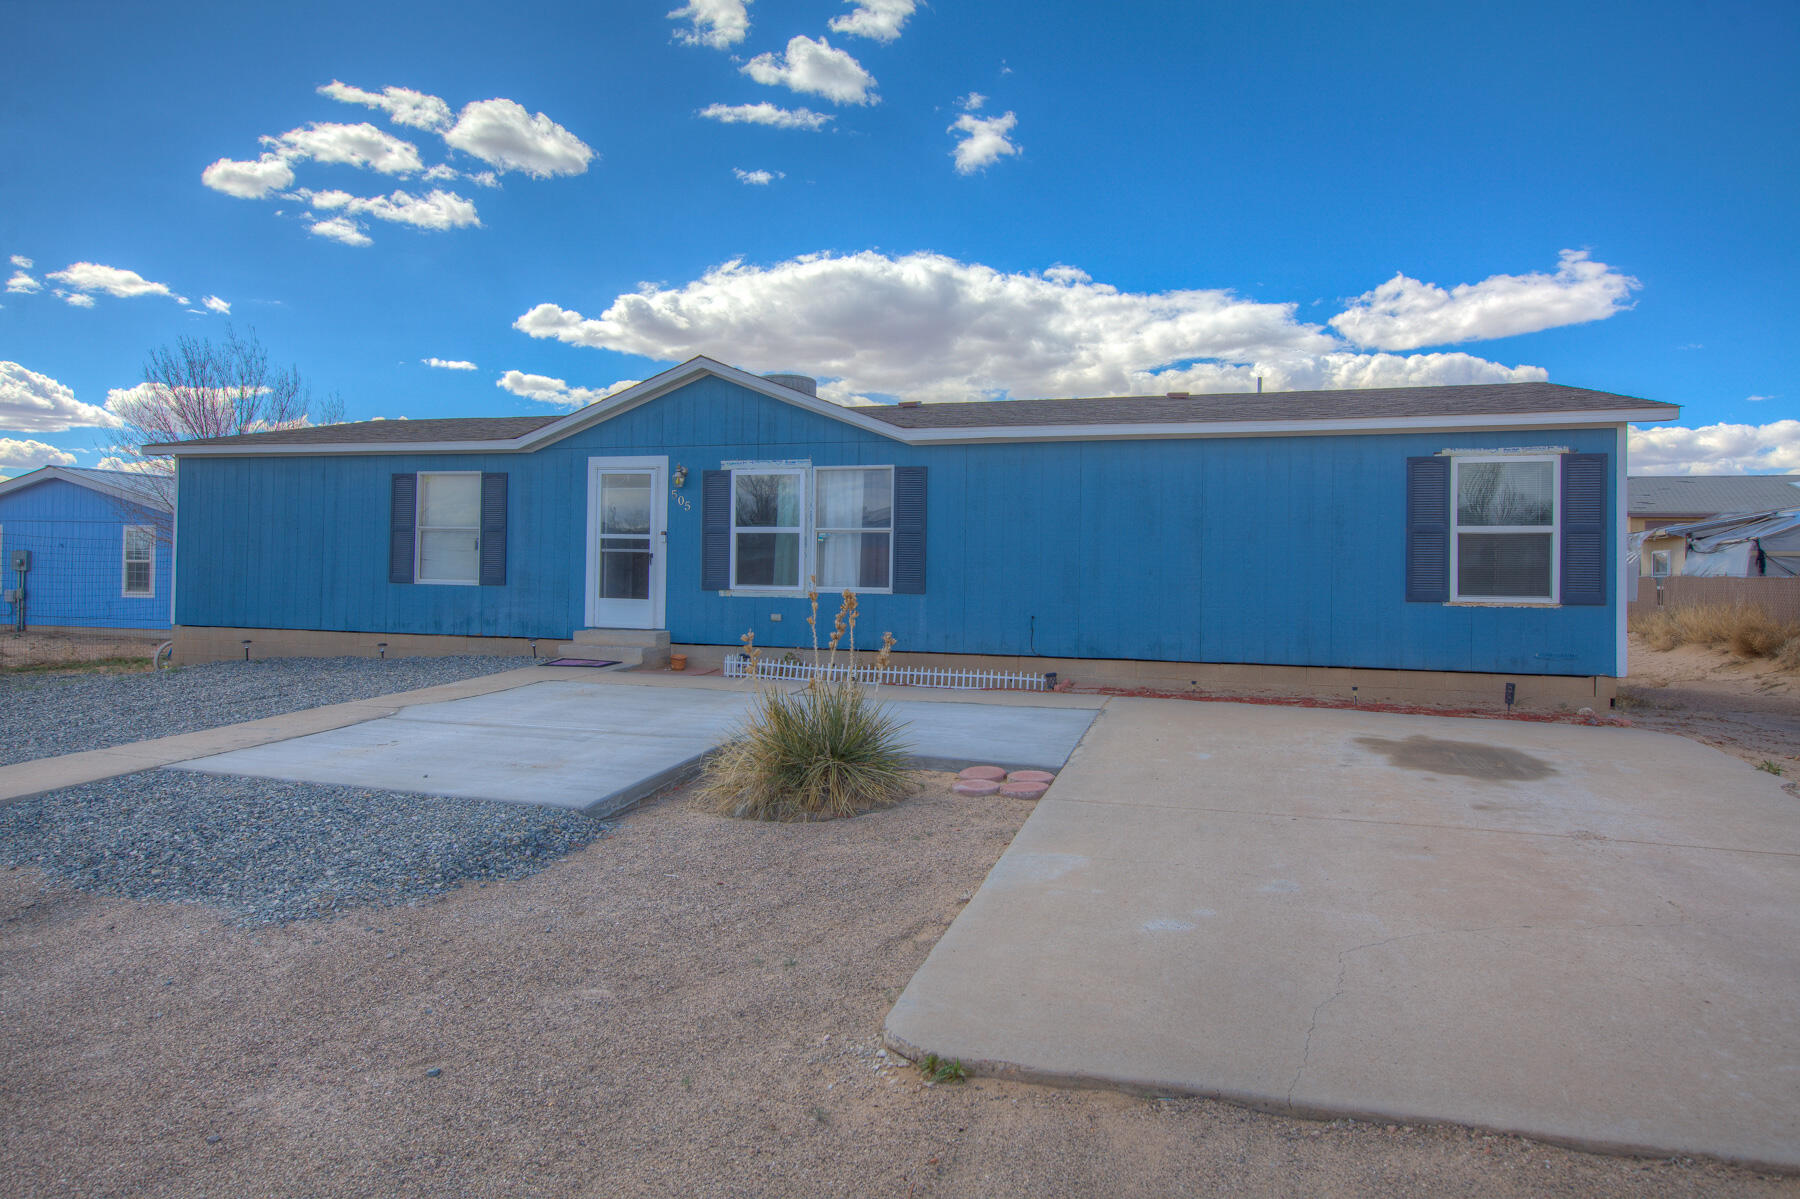 Super clean and hard to find 4 bedroom home on permanent foundation in Rio Rancho. This home also sits on a half acre with plenty of room for parking and additional vehicles. Updates include newer paint, flooring, and electrical upgrades, and a new roof in 2018. Minutes from schools, shopping, dining, and entertainment.